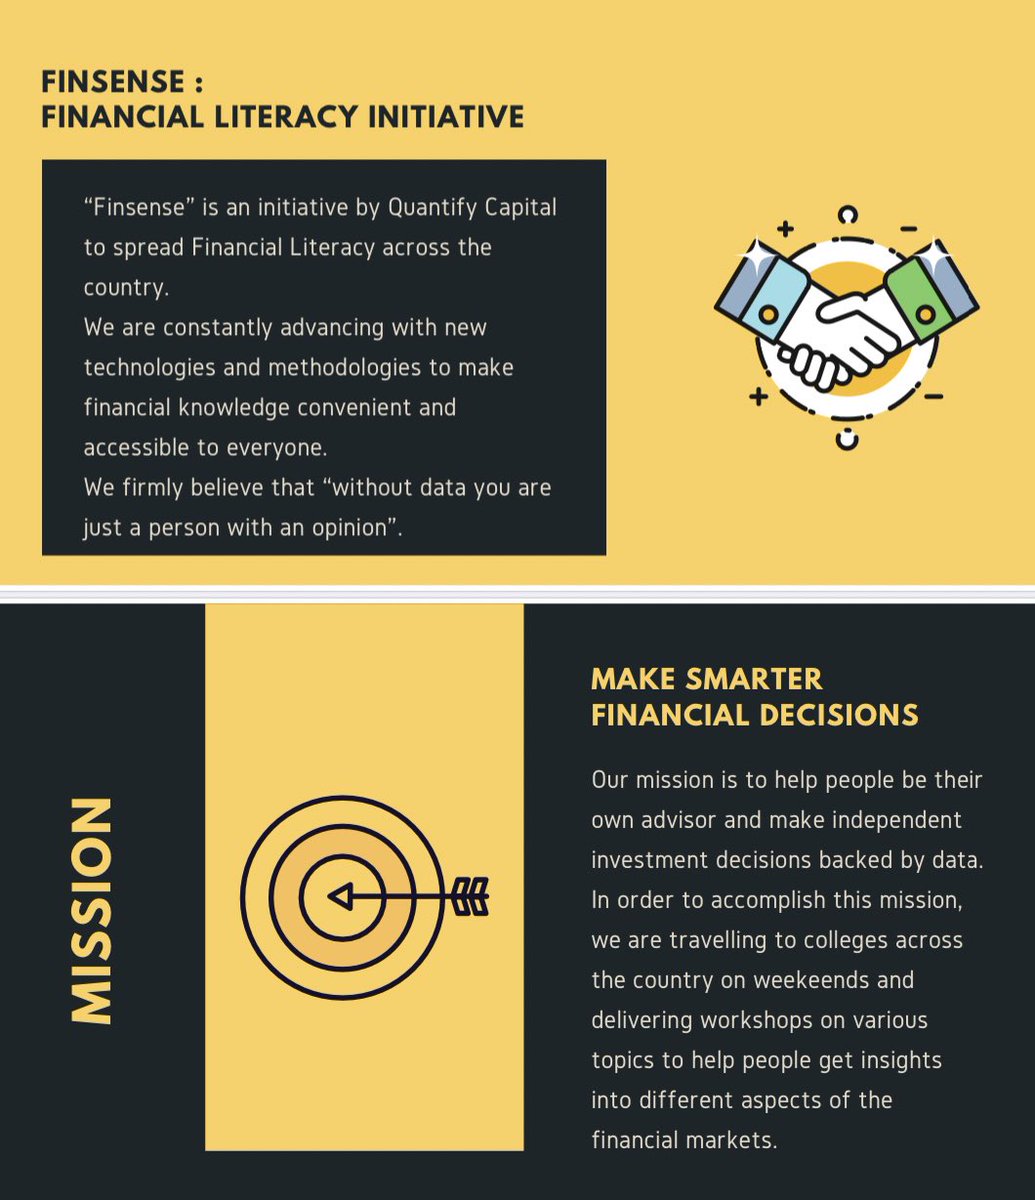 10) I launched “Finsense,” an initiative by Quantify Capital to spread Financial Literacy across the country. It’s mission is to help people be their own advisor and make independent investment decisions backed solely by data. #financial  #literacy  #knowledge